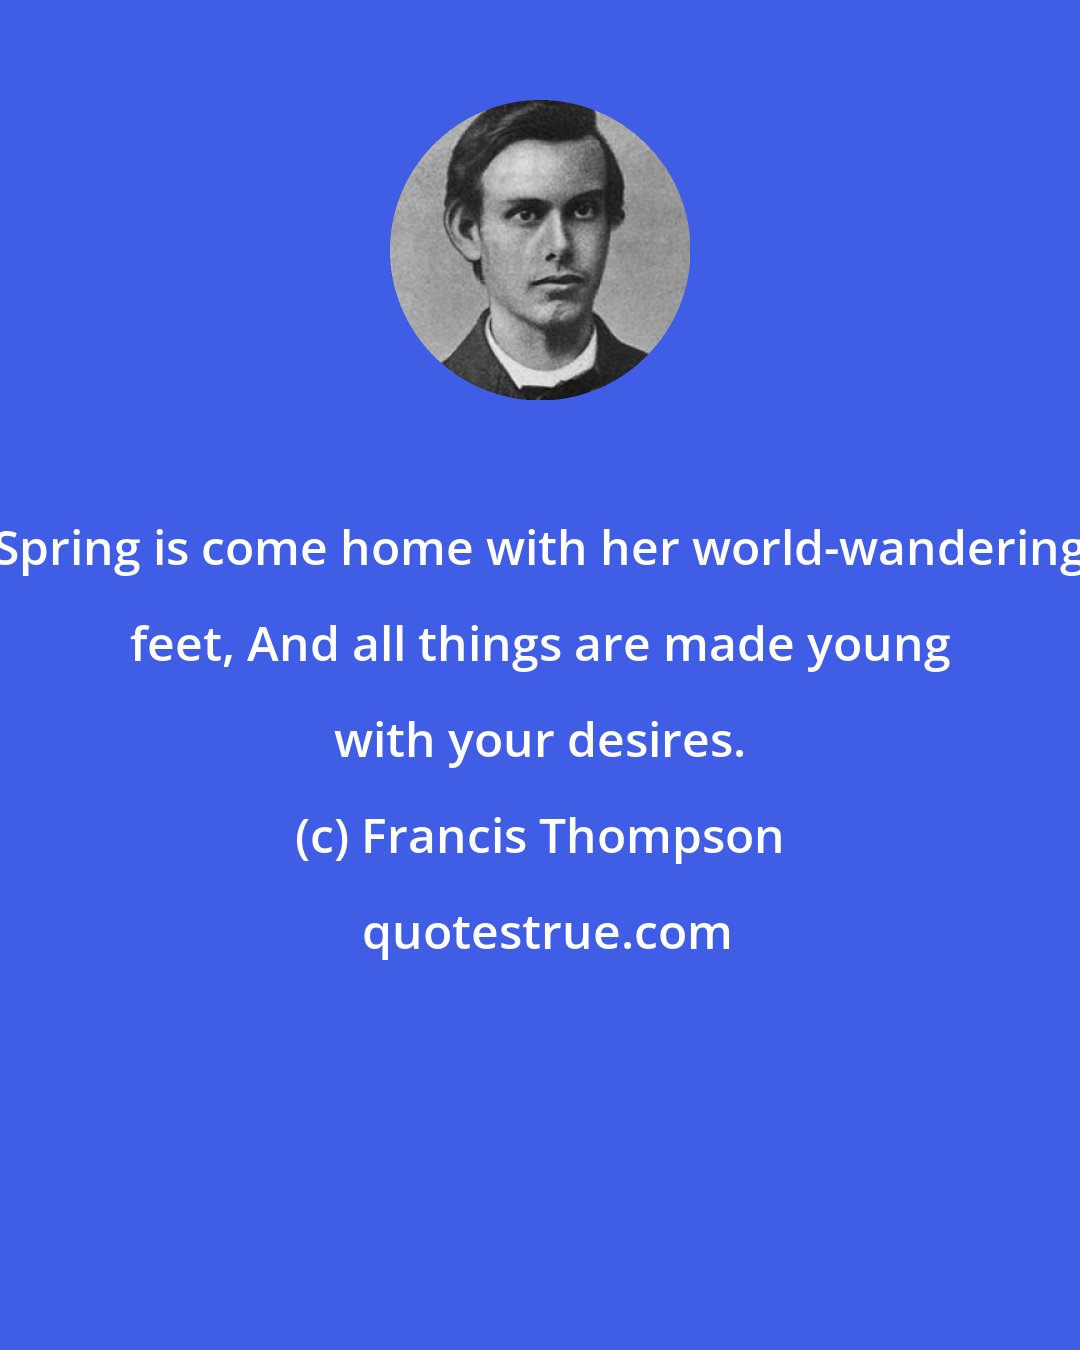 Francis Thompson: Spring is come home with her world-wandering feet, And all things are made young with your desires.